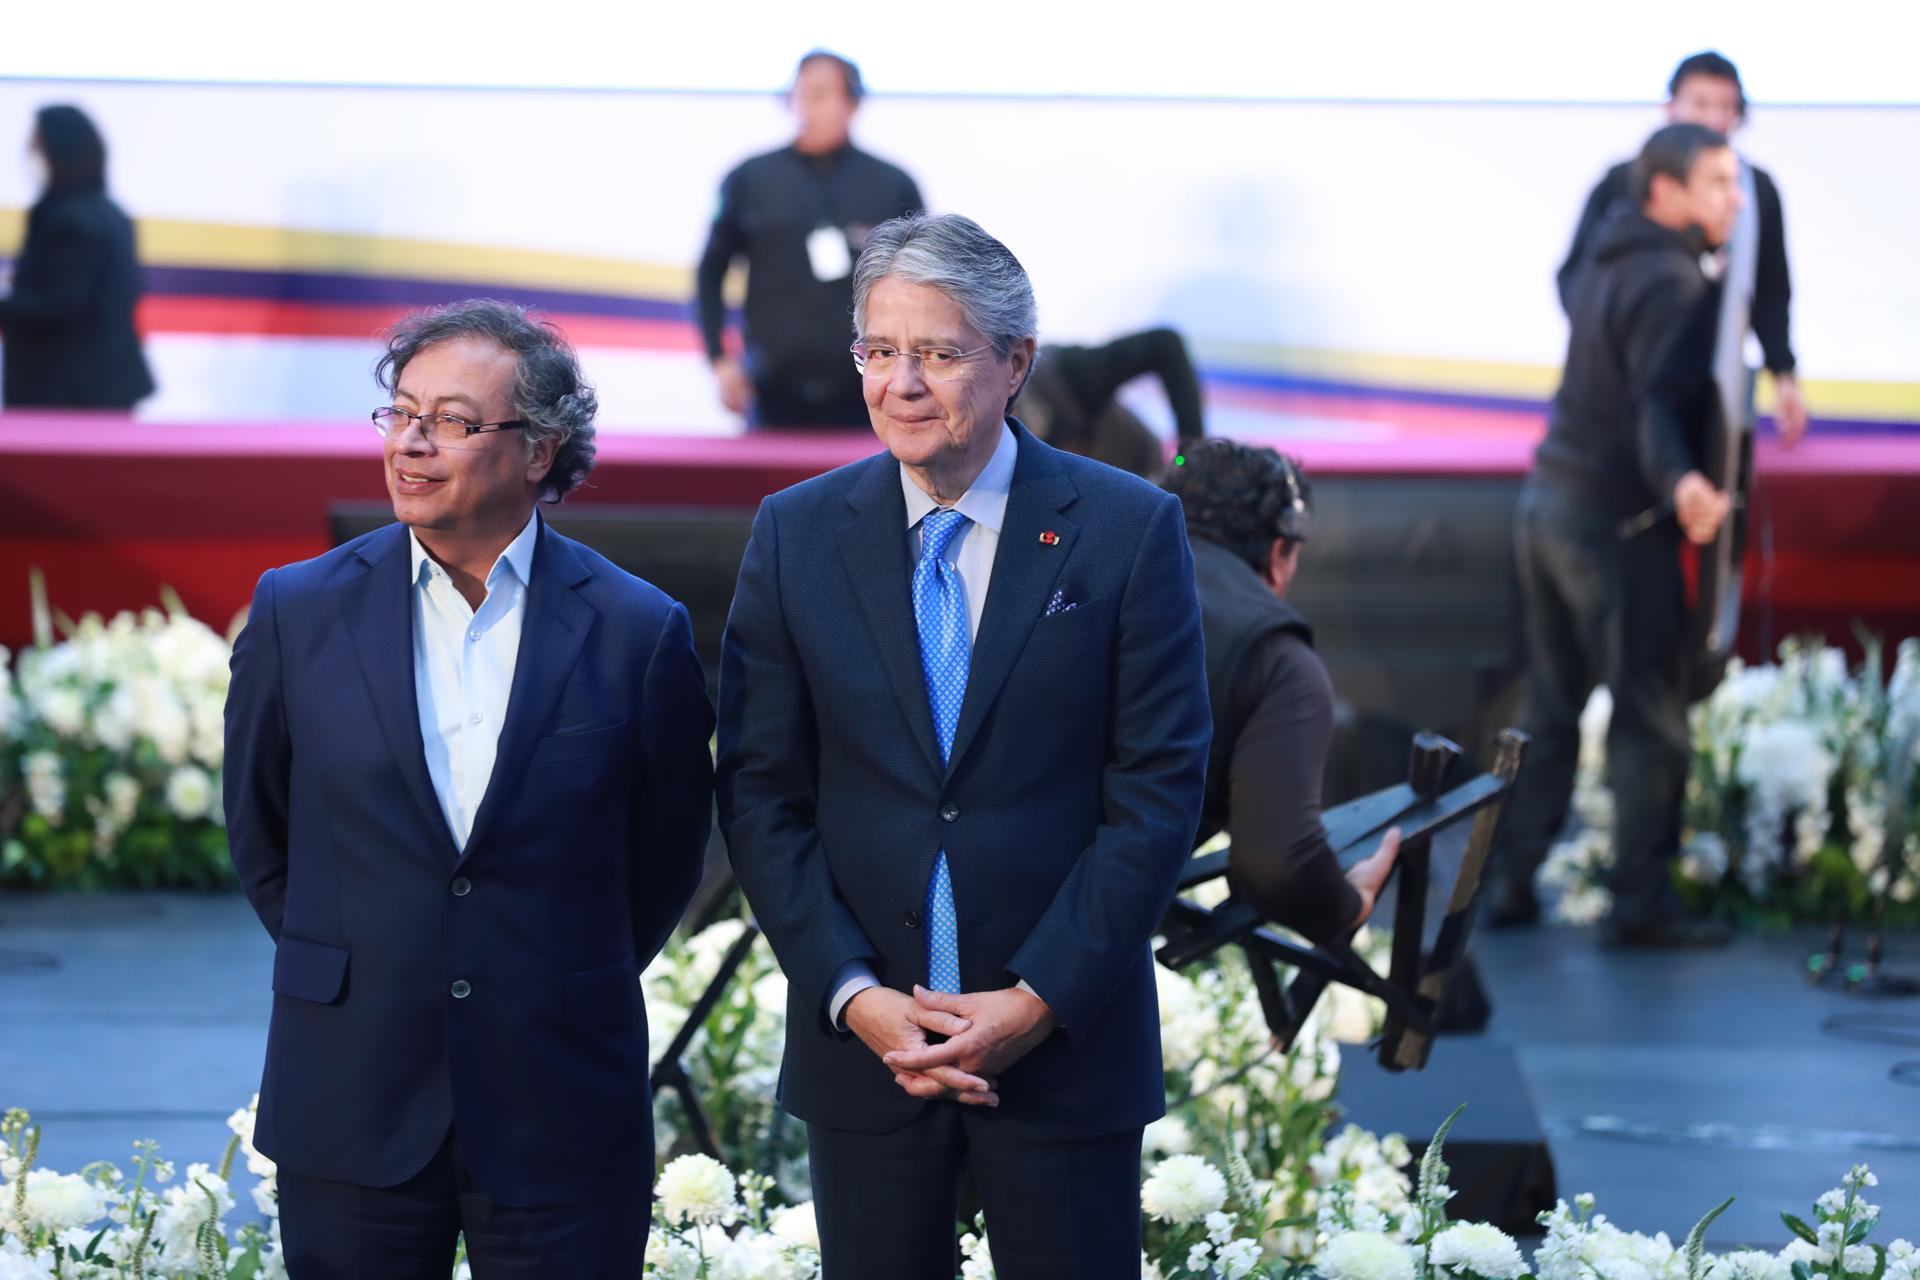 The president of Colombia, Gustavo Petro (L), and his counterpart from Ecuador, Guillermo Lasso (R), participate in the11th Ecuador-Colombia binational cabinet in the border town of Tulcán, Ecuador, on Jan. 31, 2023. EFE FILE/José Jácome